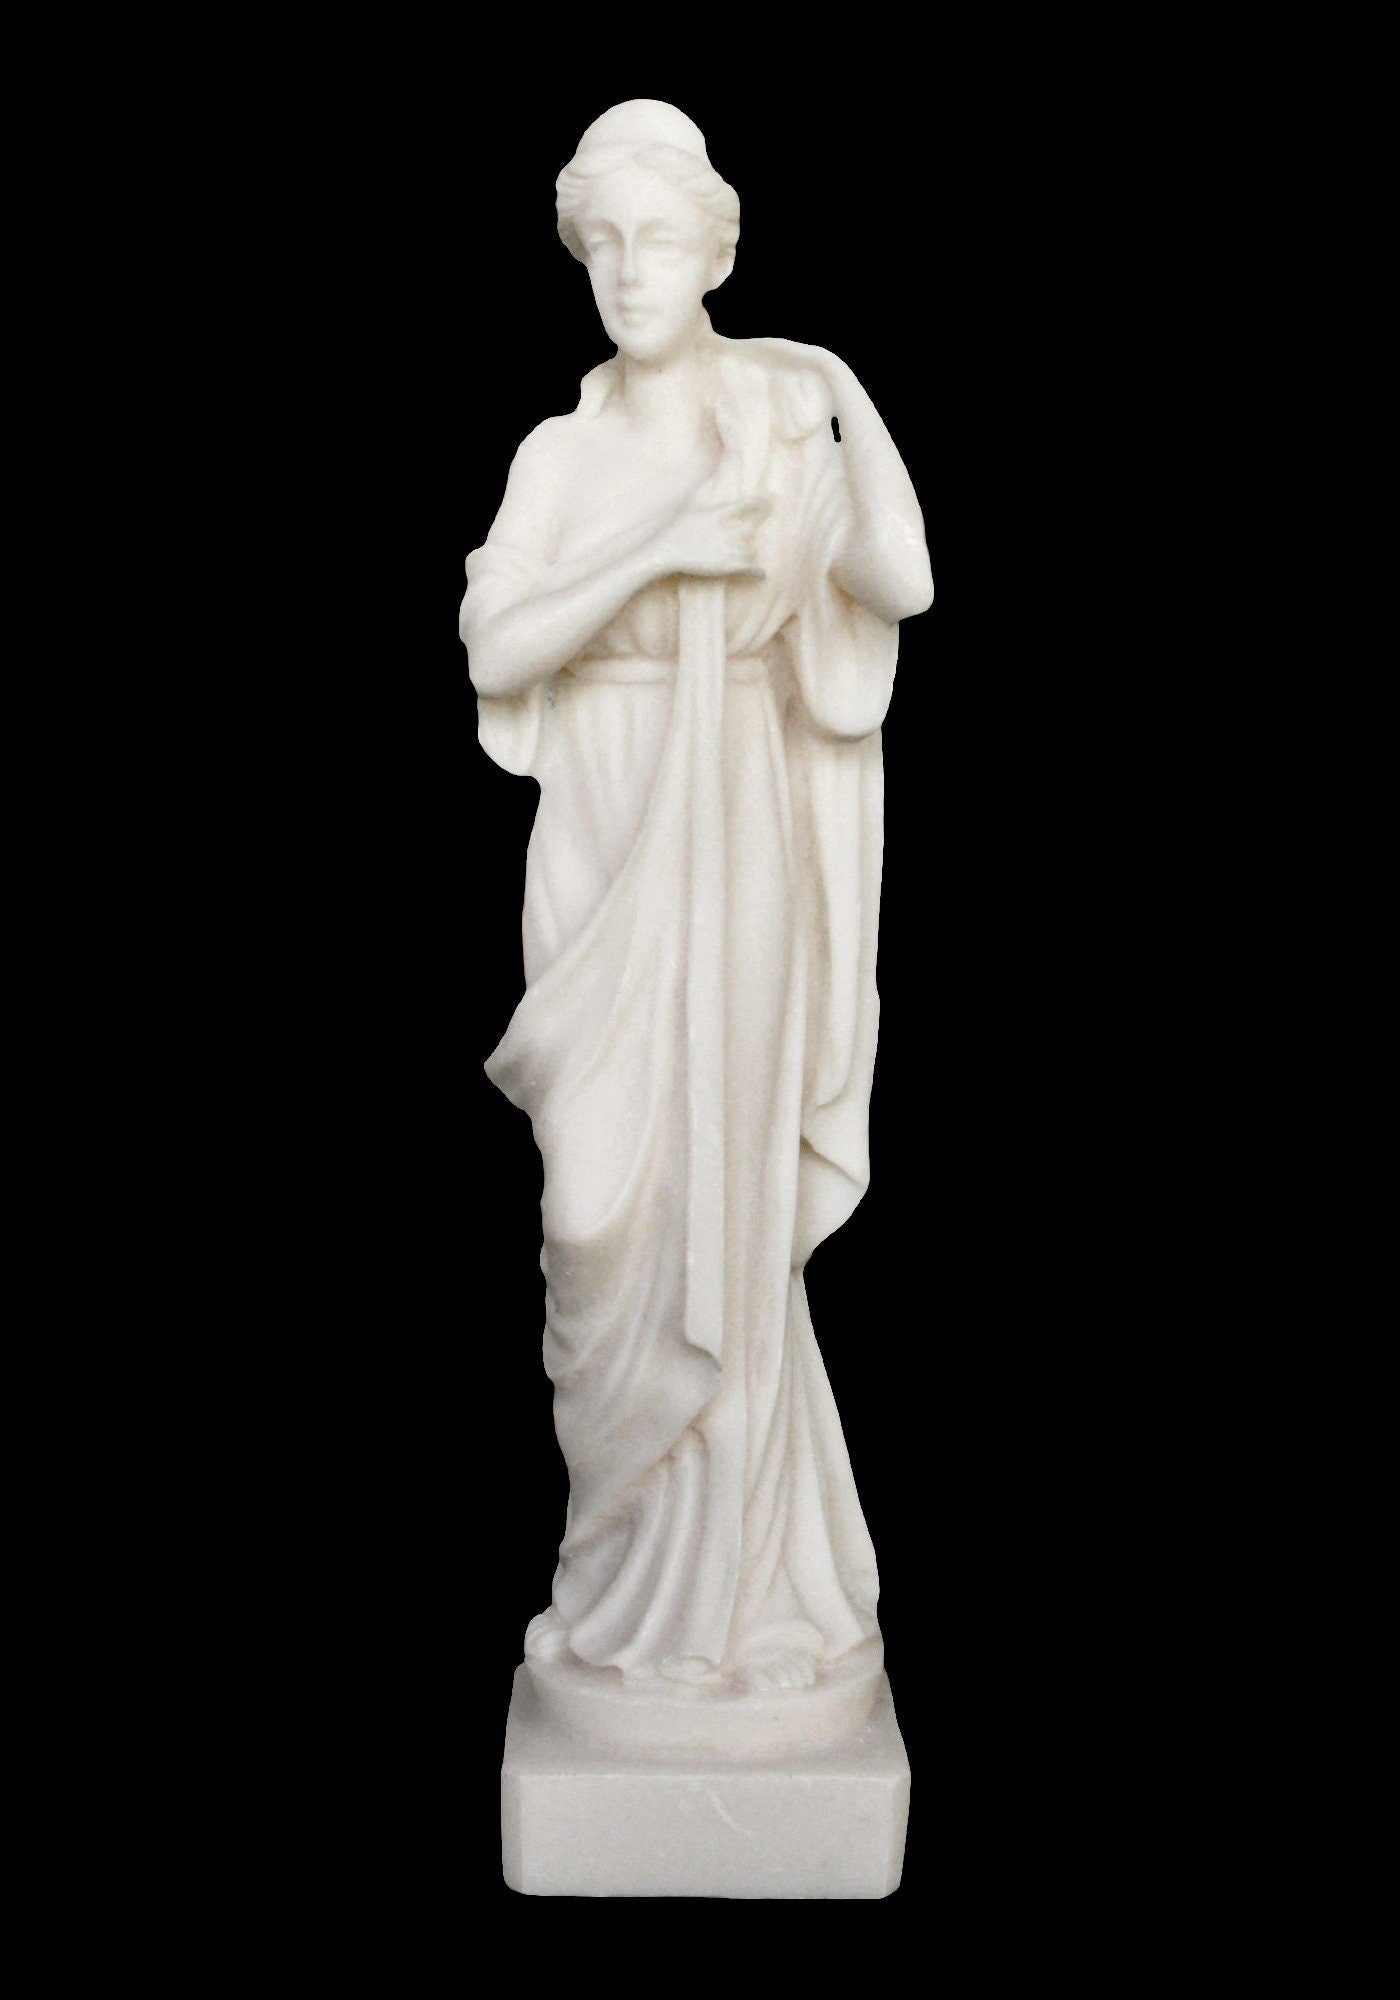 Artemis Diana – Greek Roman Goddess of Hunt, the Wilderness, Wild Animals, the Moon, and Chastity - Sister of Apollo - Alabaster Sculpture